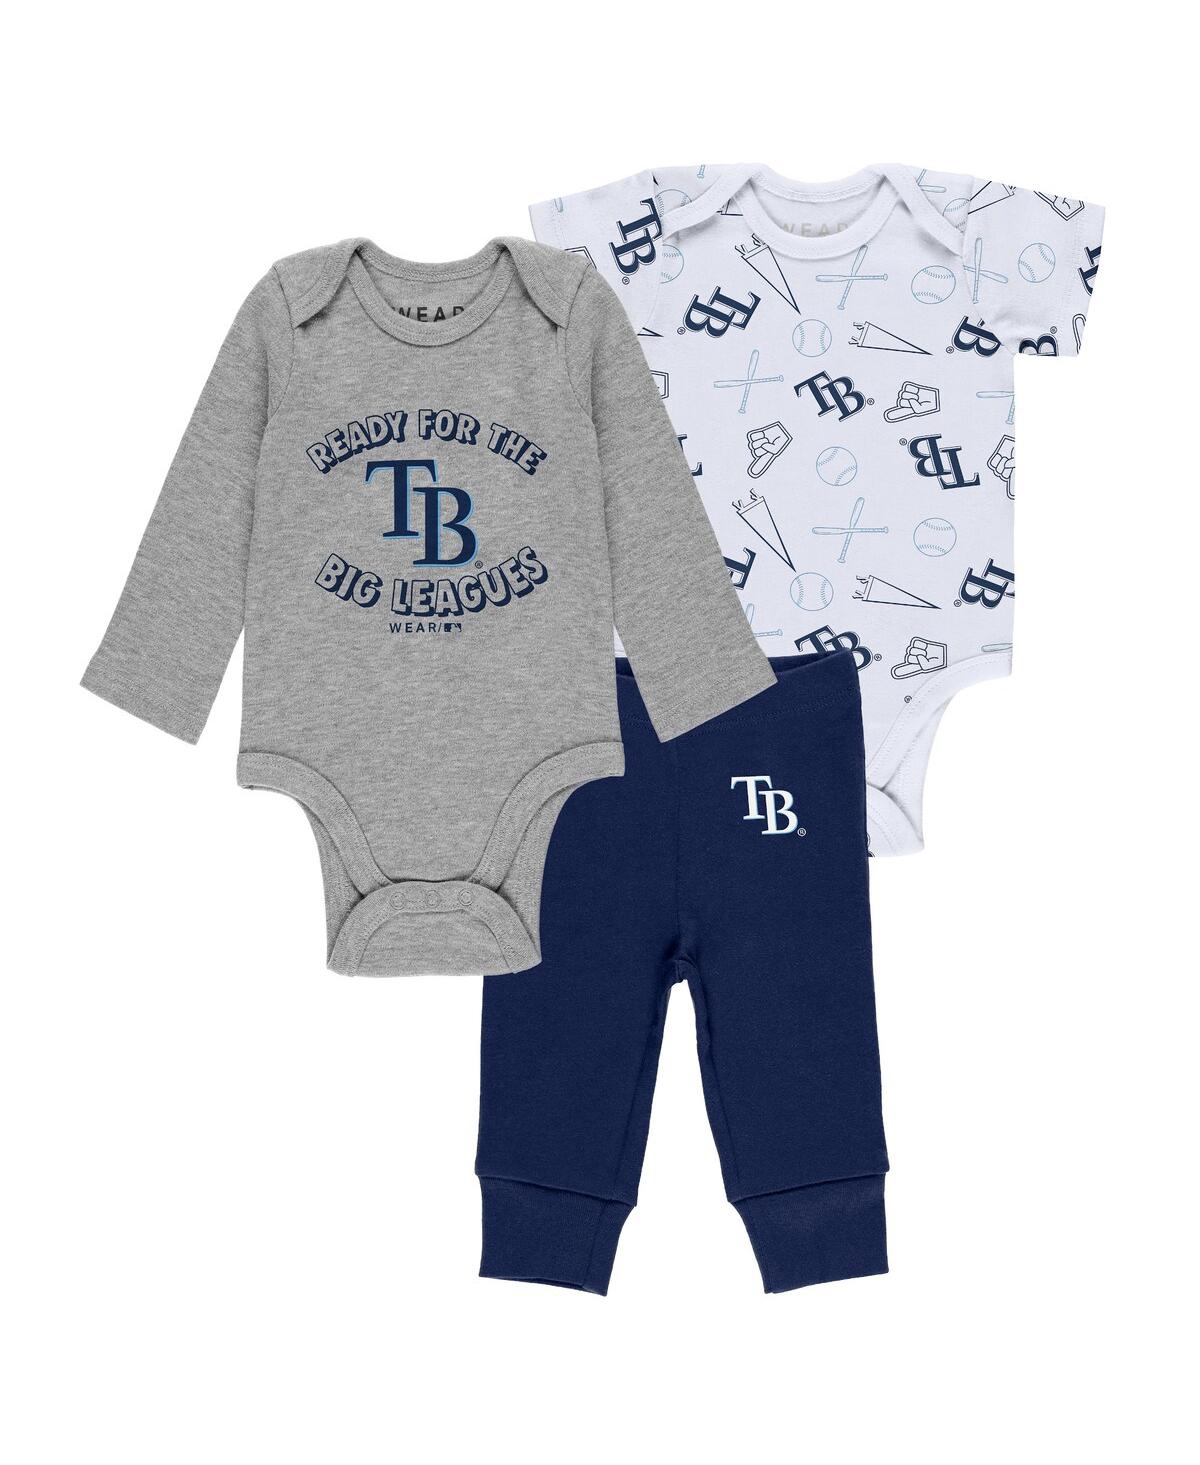 Wear By Erin Andrews Baby Boys And Girls  Gray, White, Navy Tampa Bay Rays Three-piece Turn Me Around In Gray,white,navy